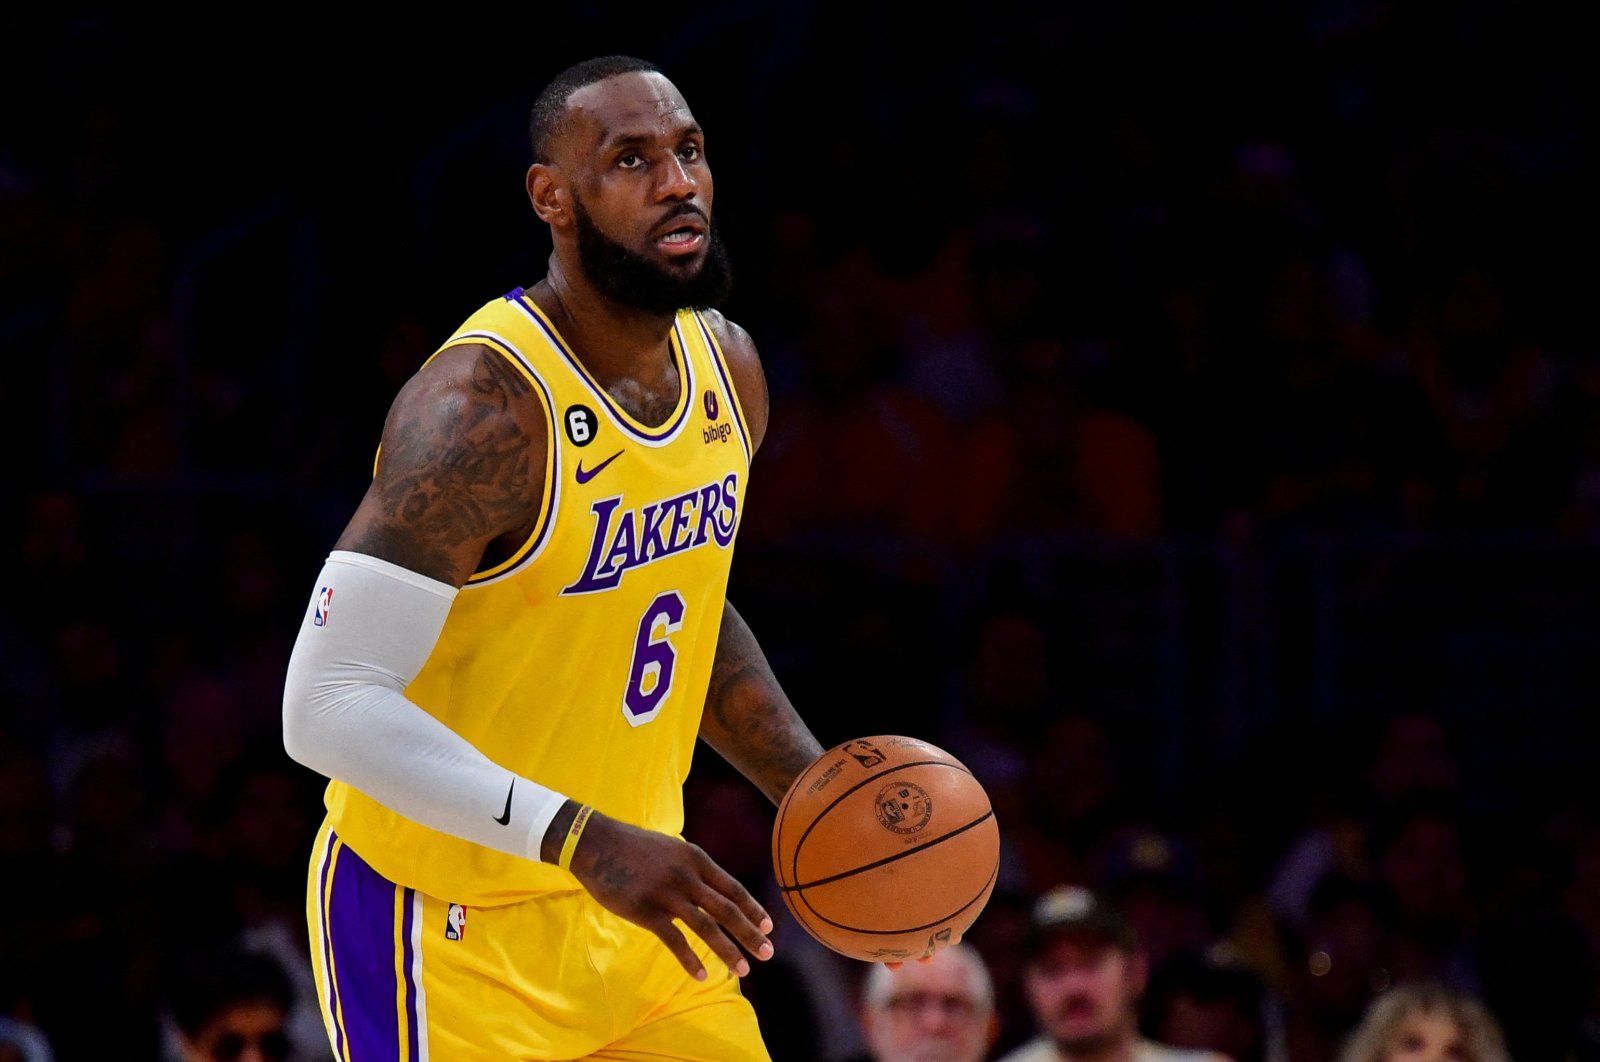 Los Angeles Lakers forward LeBron James drives to the basket against the Denver Nuggets during the third quarter in game four of the Western Conference Finals for the 2023 NBA playoffs at Crypto.com Arena, Los Angeles, U.S., May 22, 2023. (Reuters Photo)